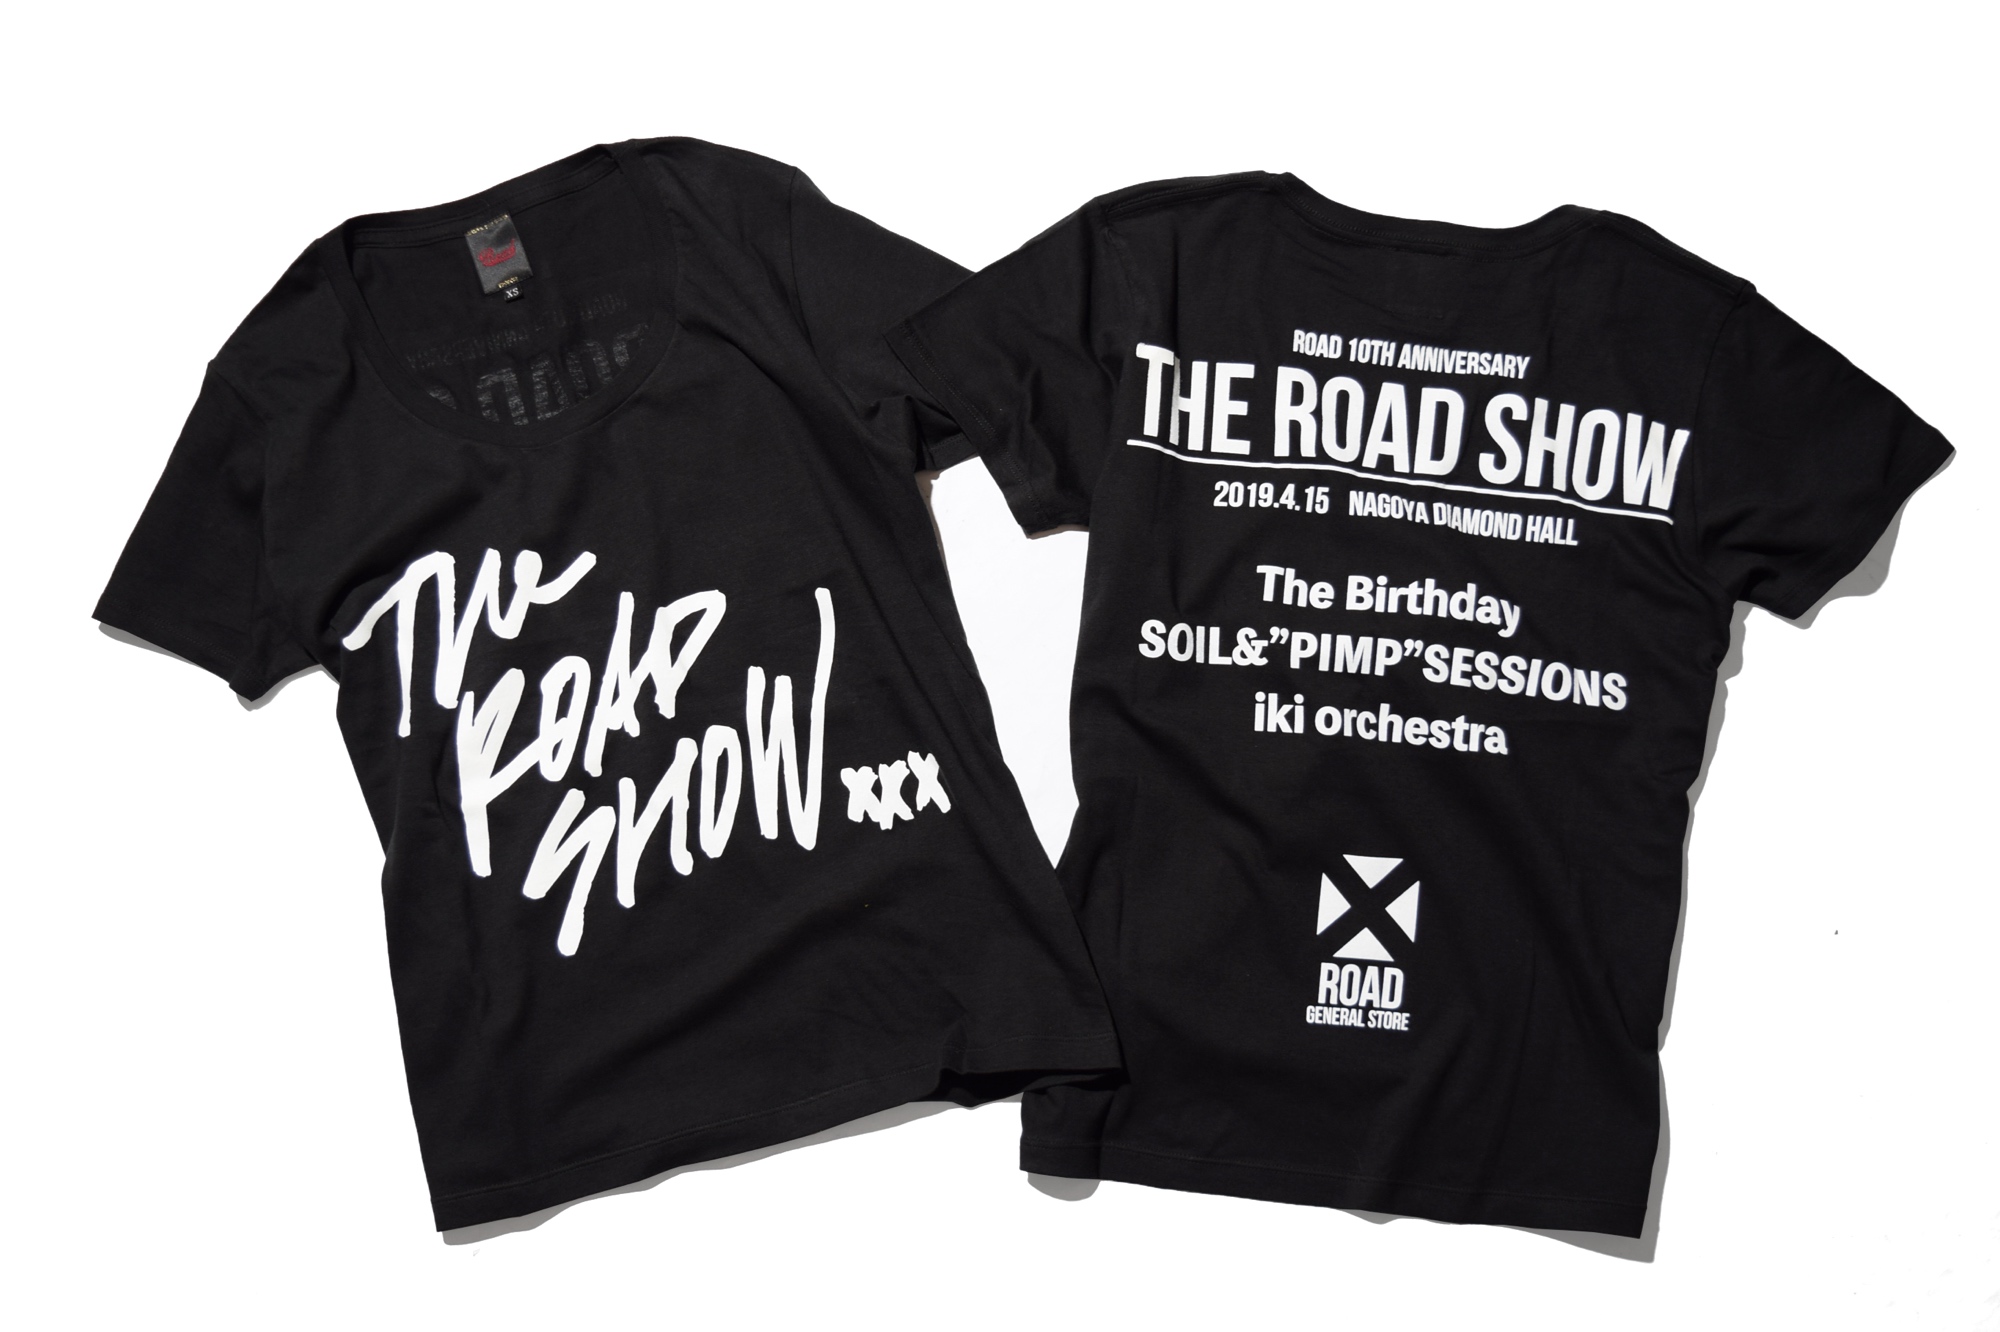 THE ROAD SHOW GOODS